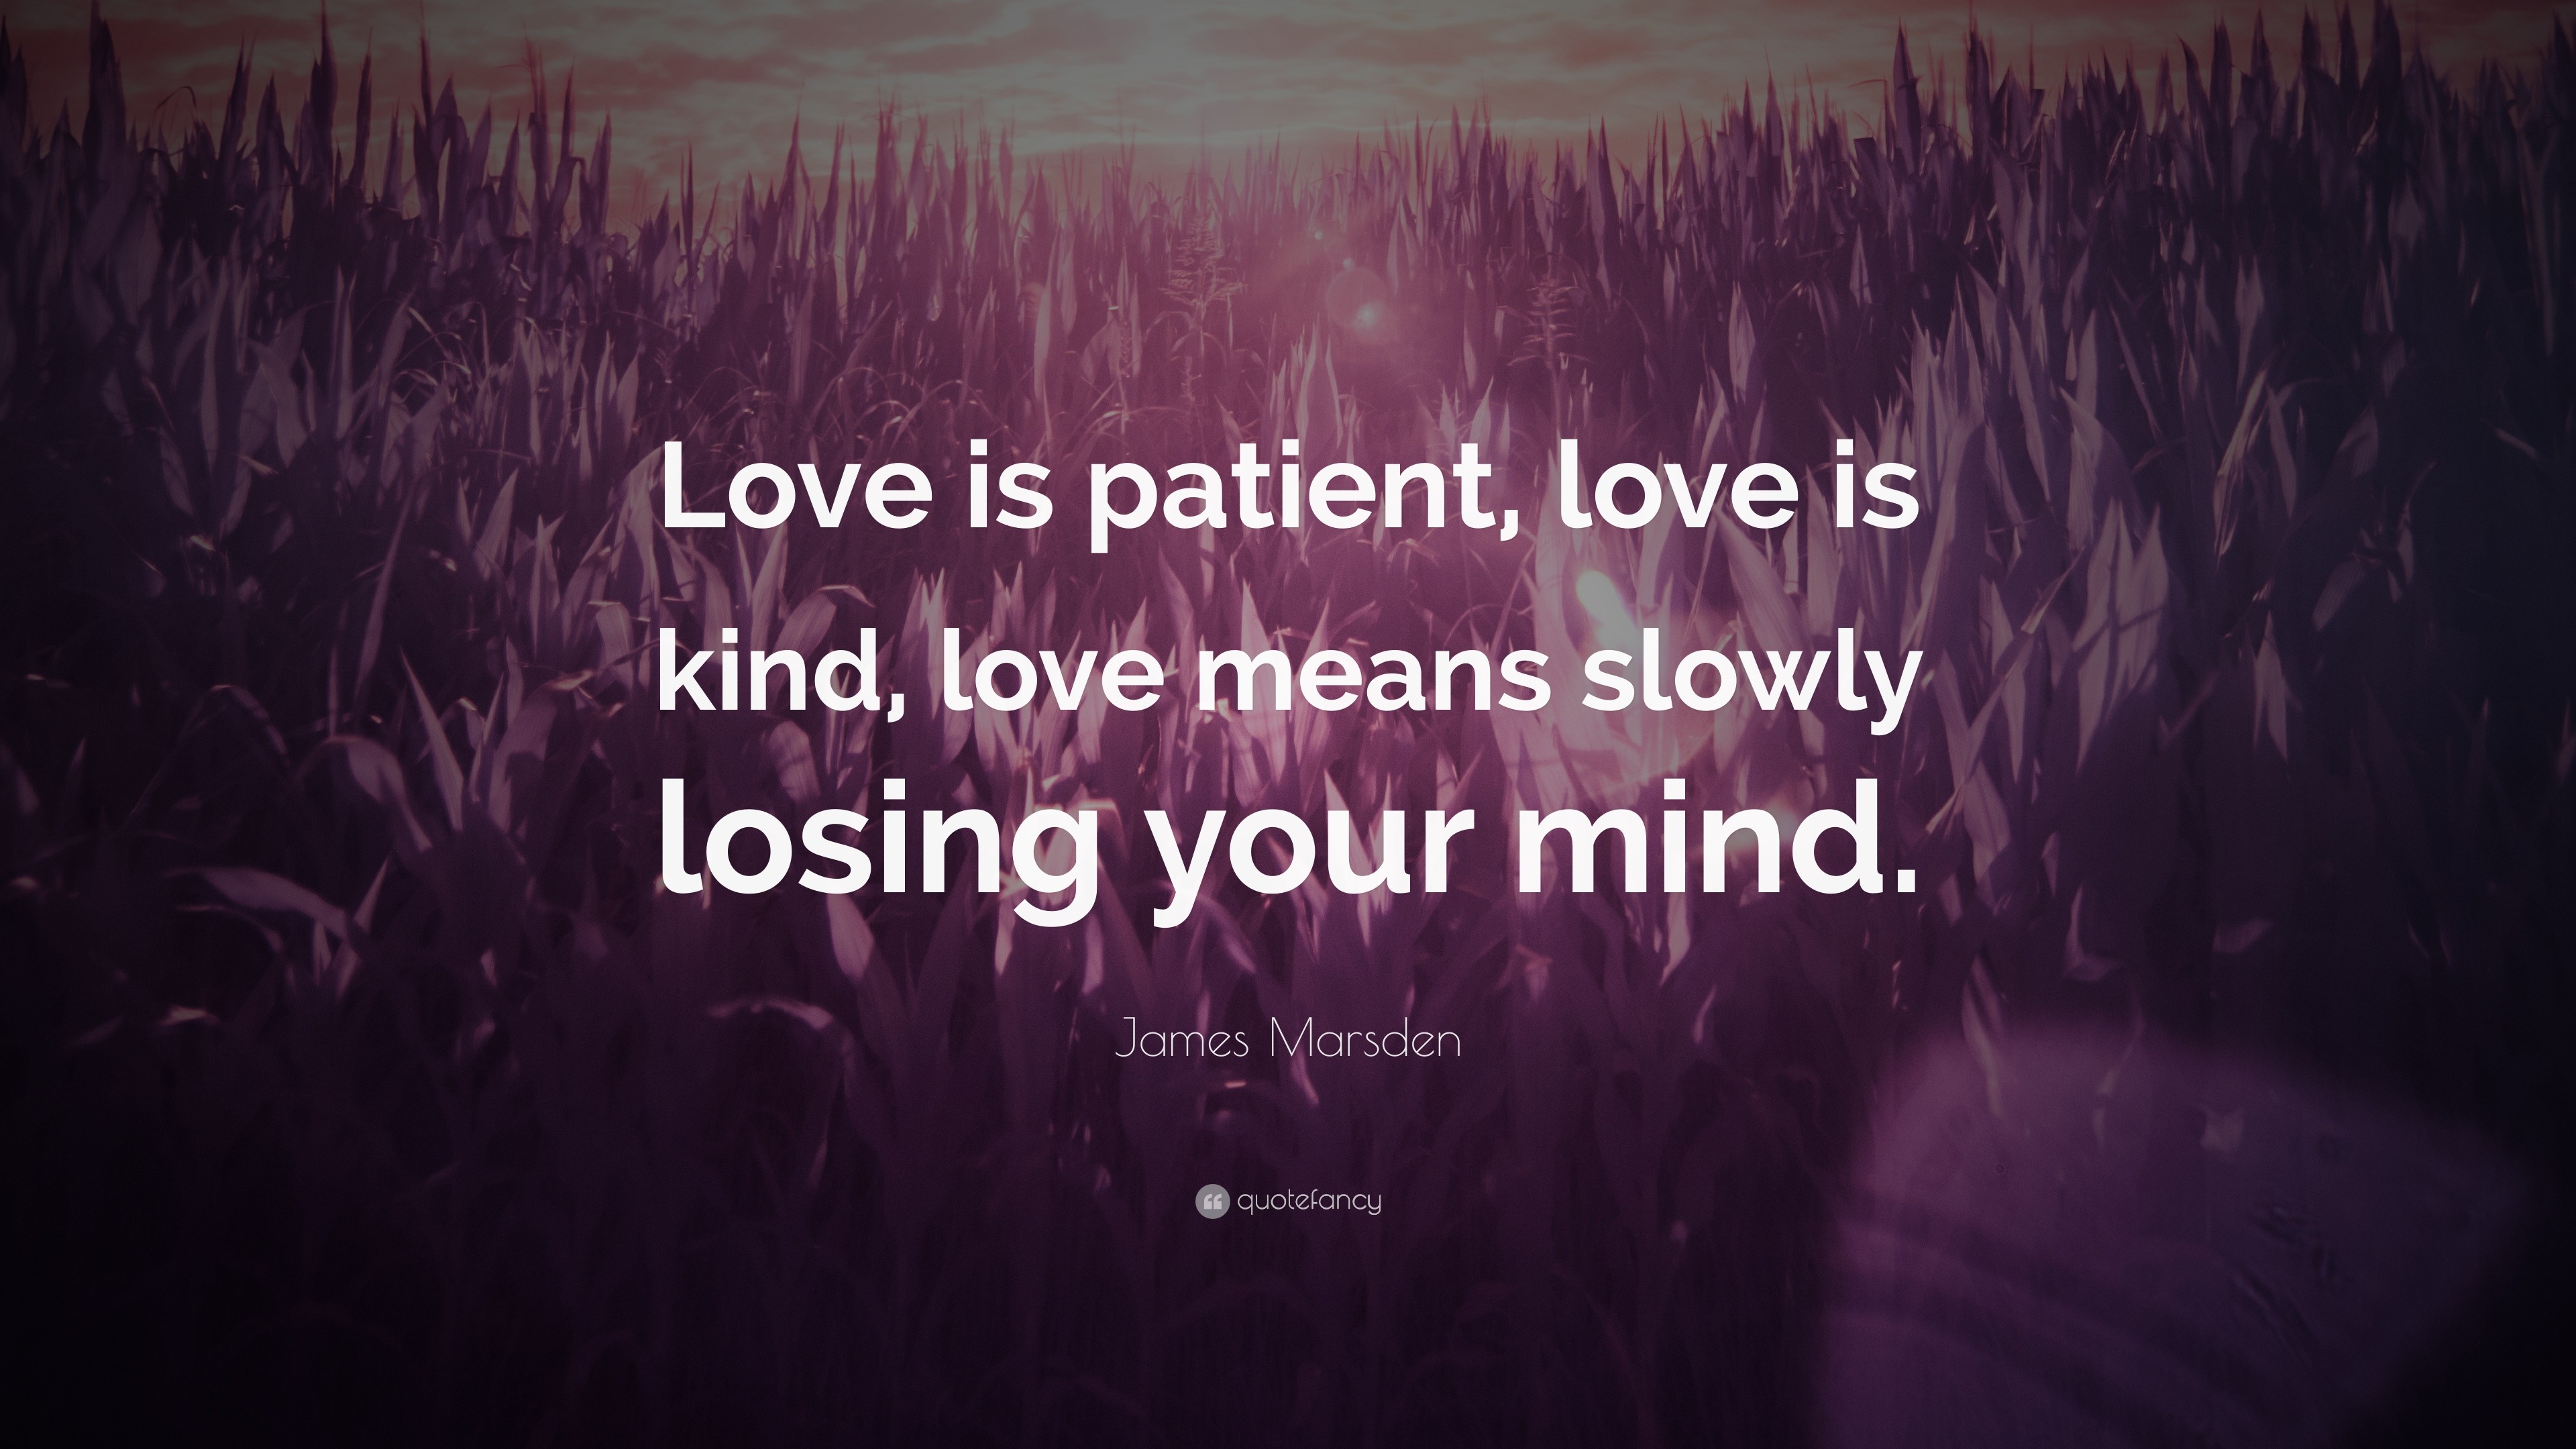 James Marsden Quote “Love is patient love is kind love means slowly